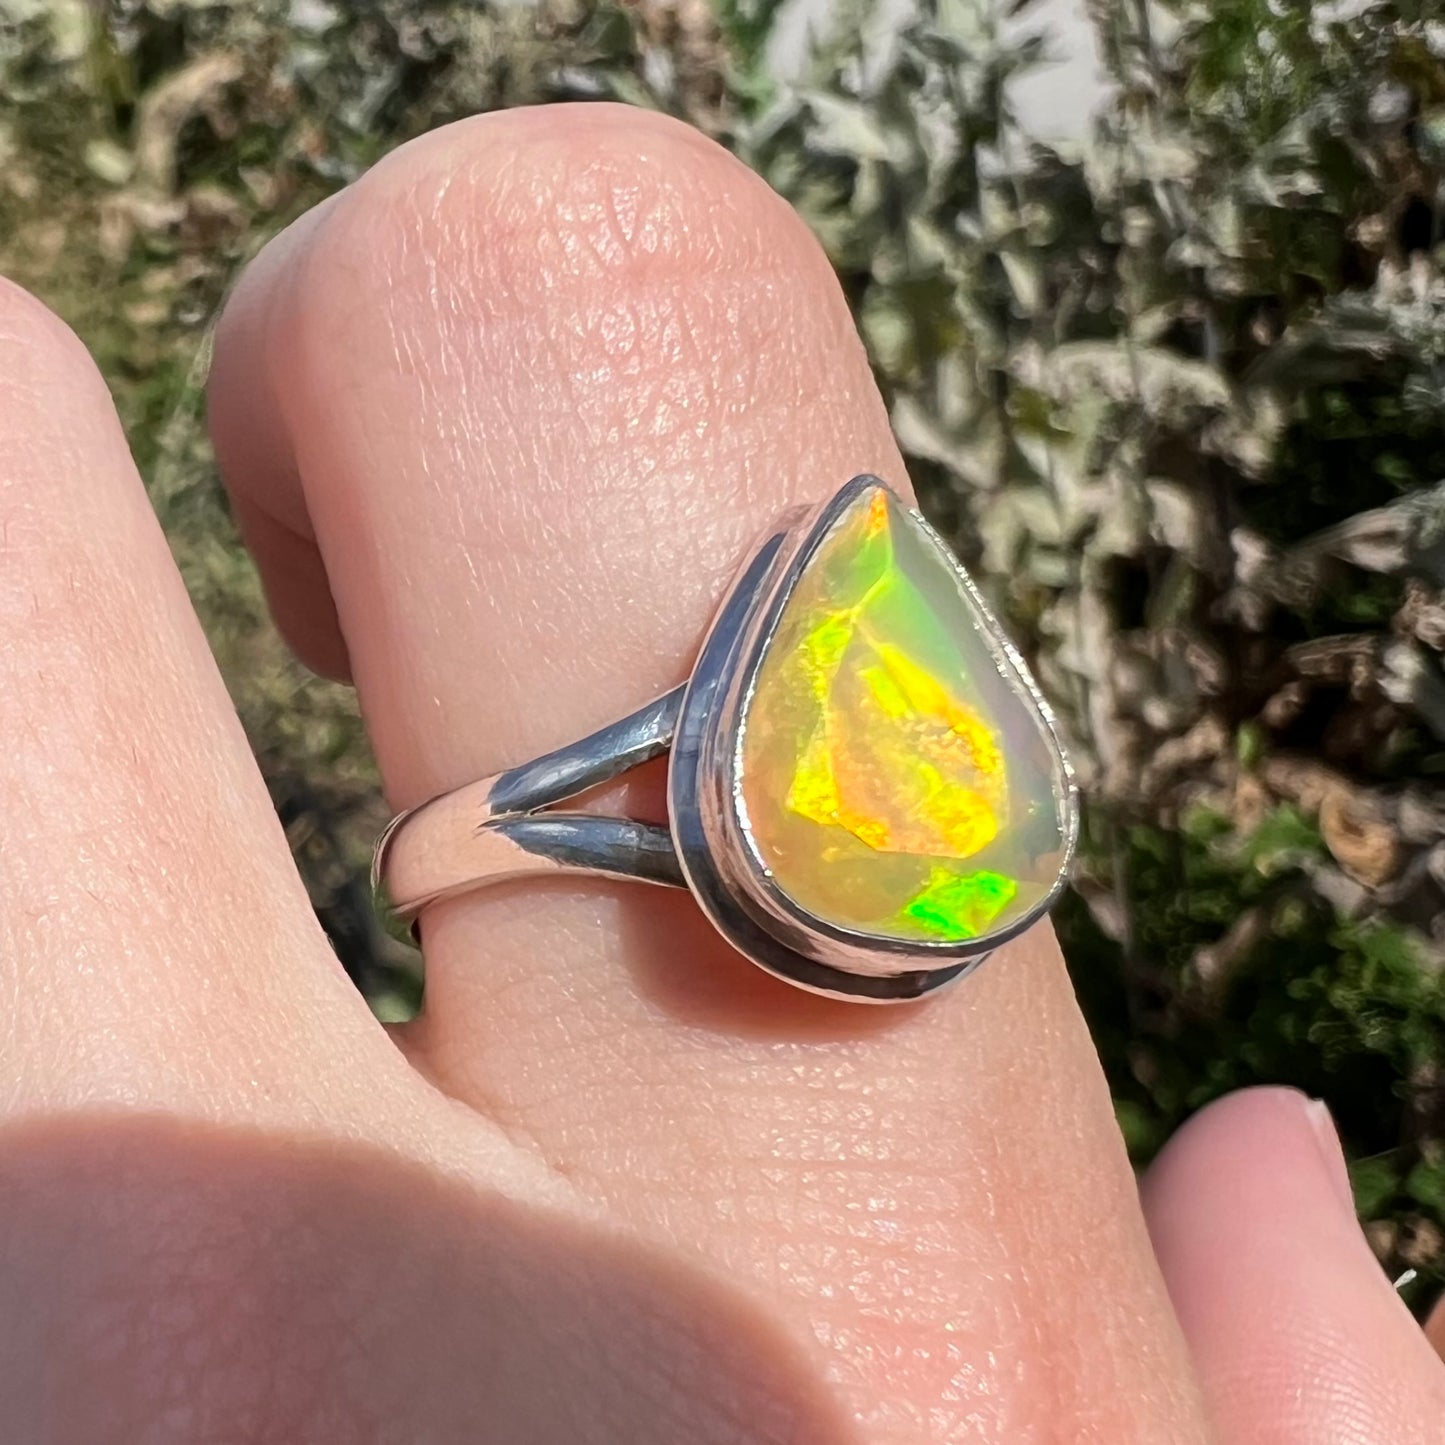 A unisex sterling silver ring set with a faceted pear shaped Ethiopian fire opal.  The opal plays orange, red, and green colors.